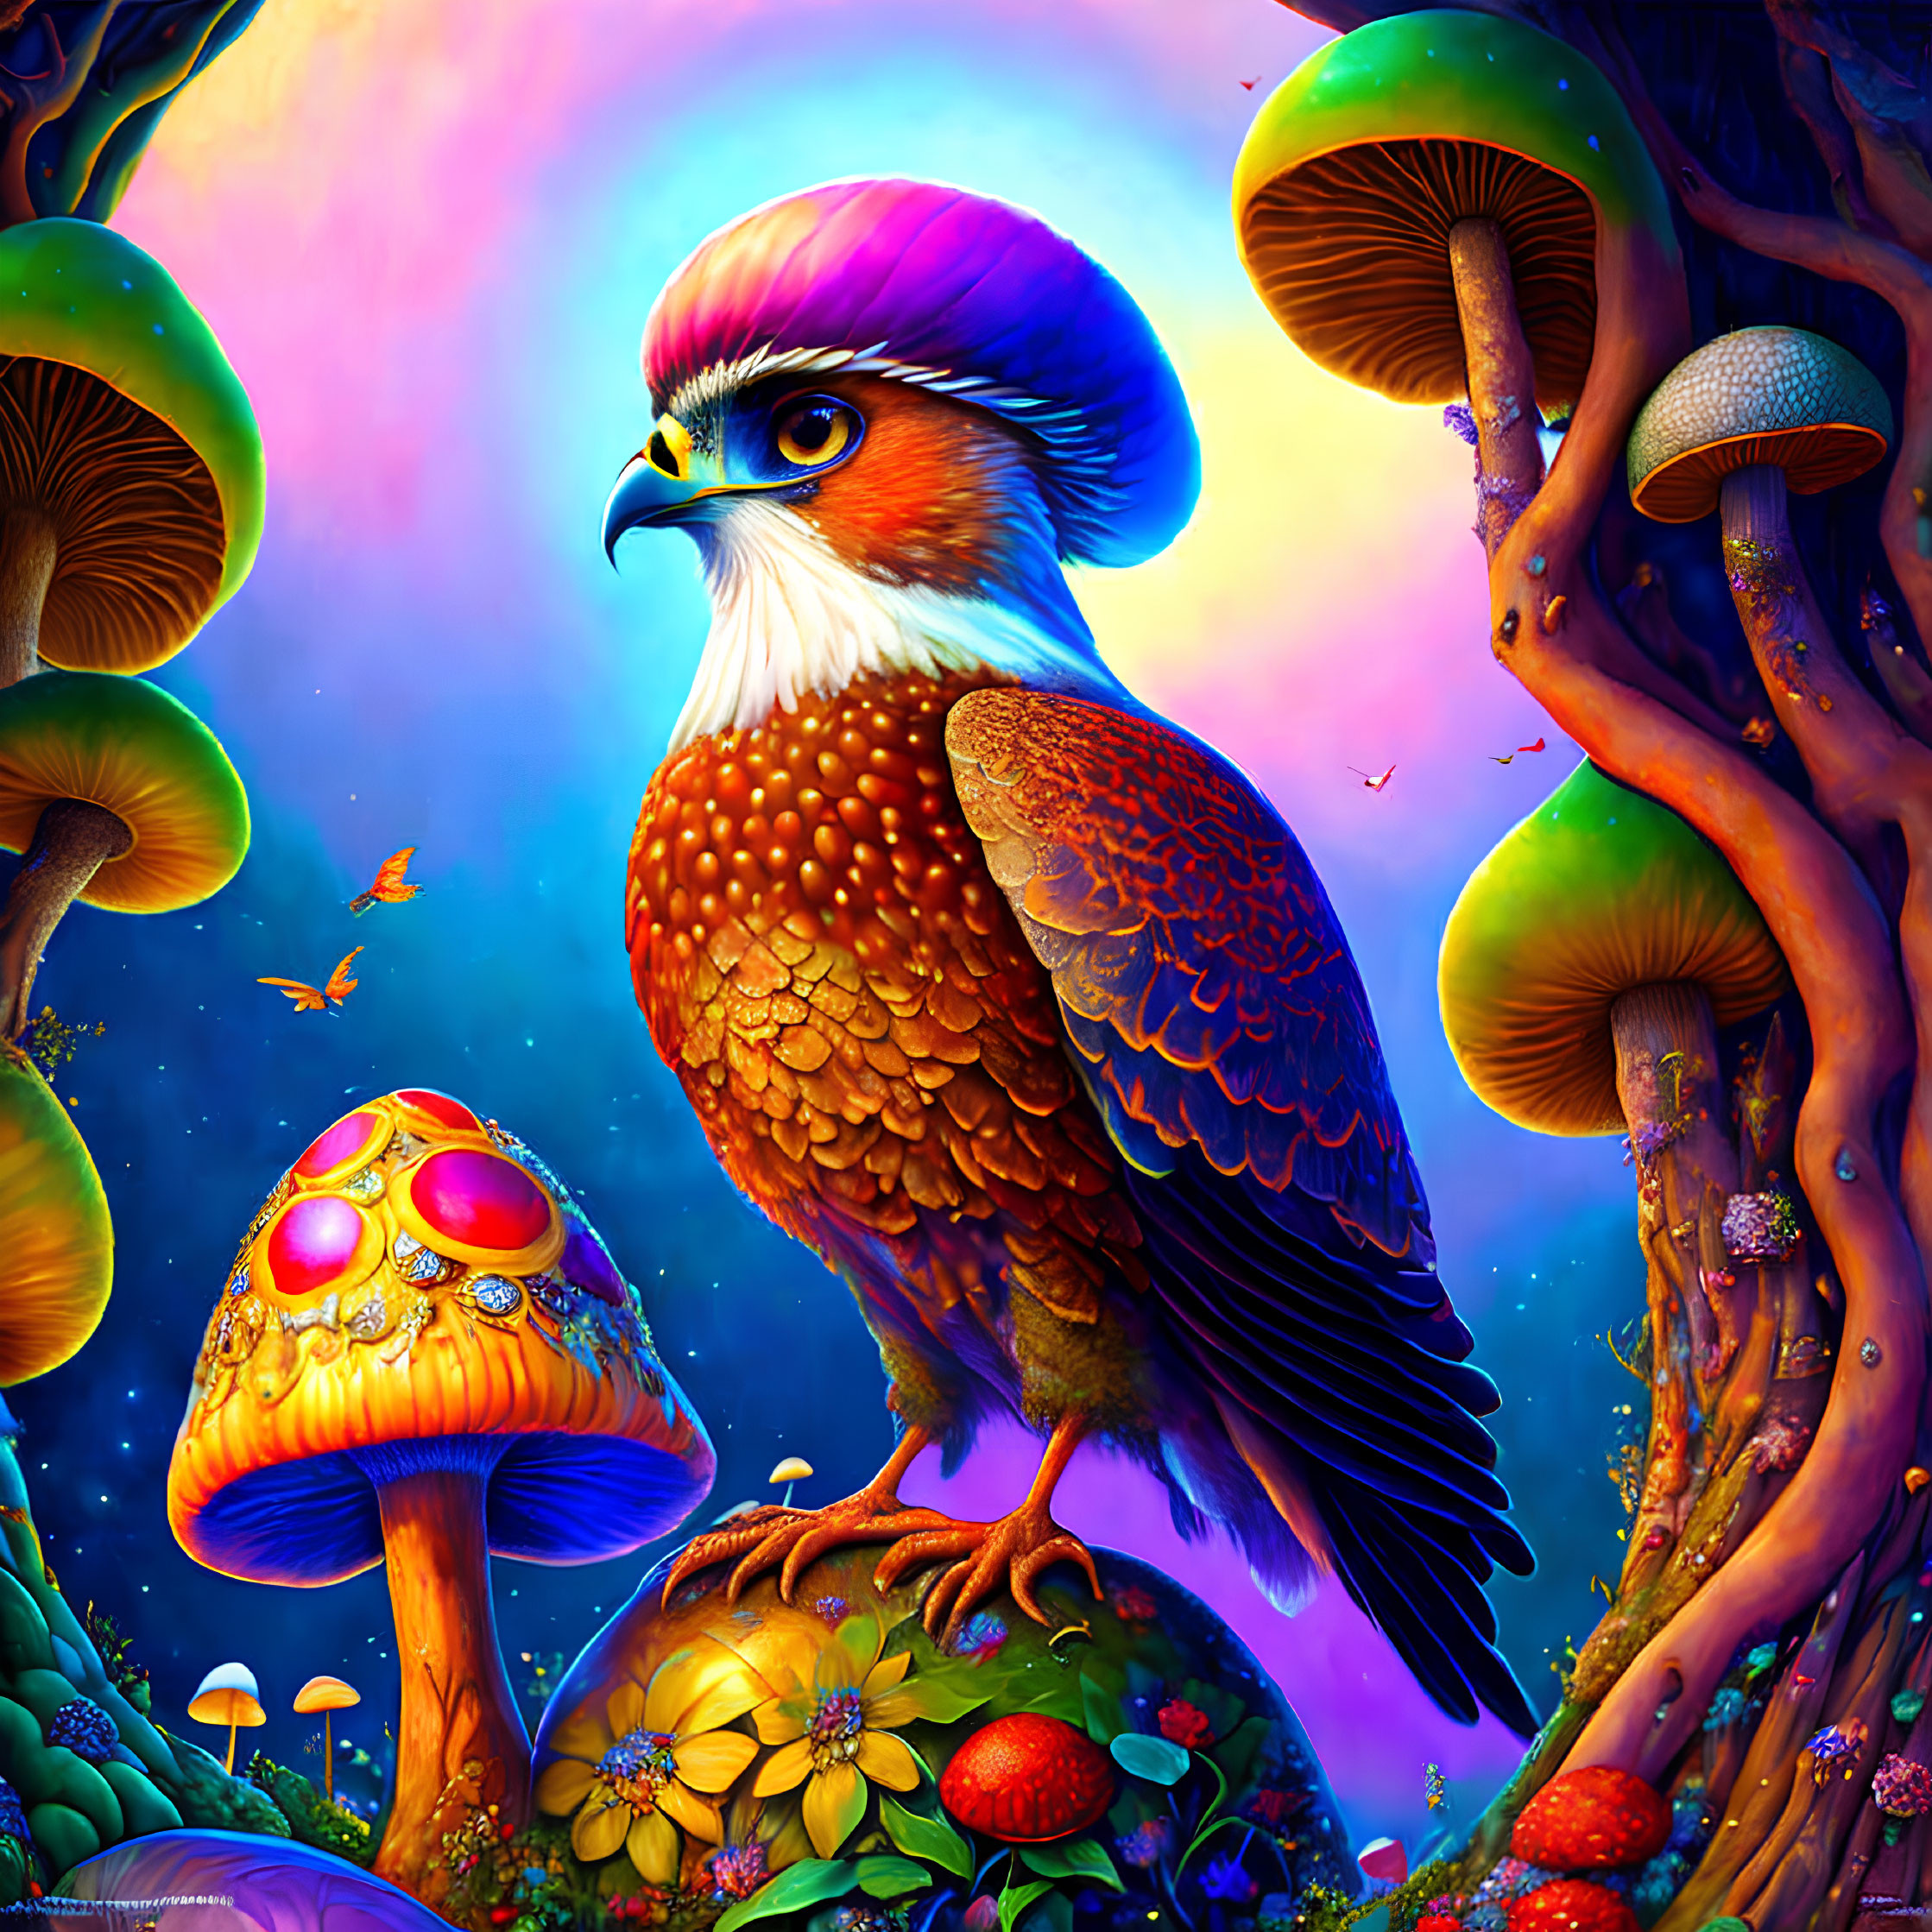 Colorful eagle on mushroom in enchanted forest with glowing flora